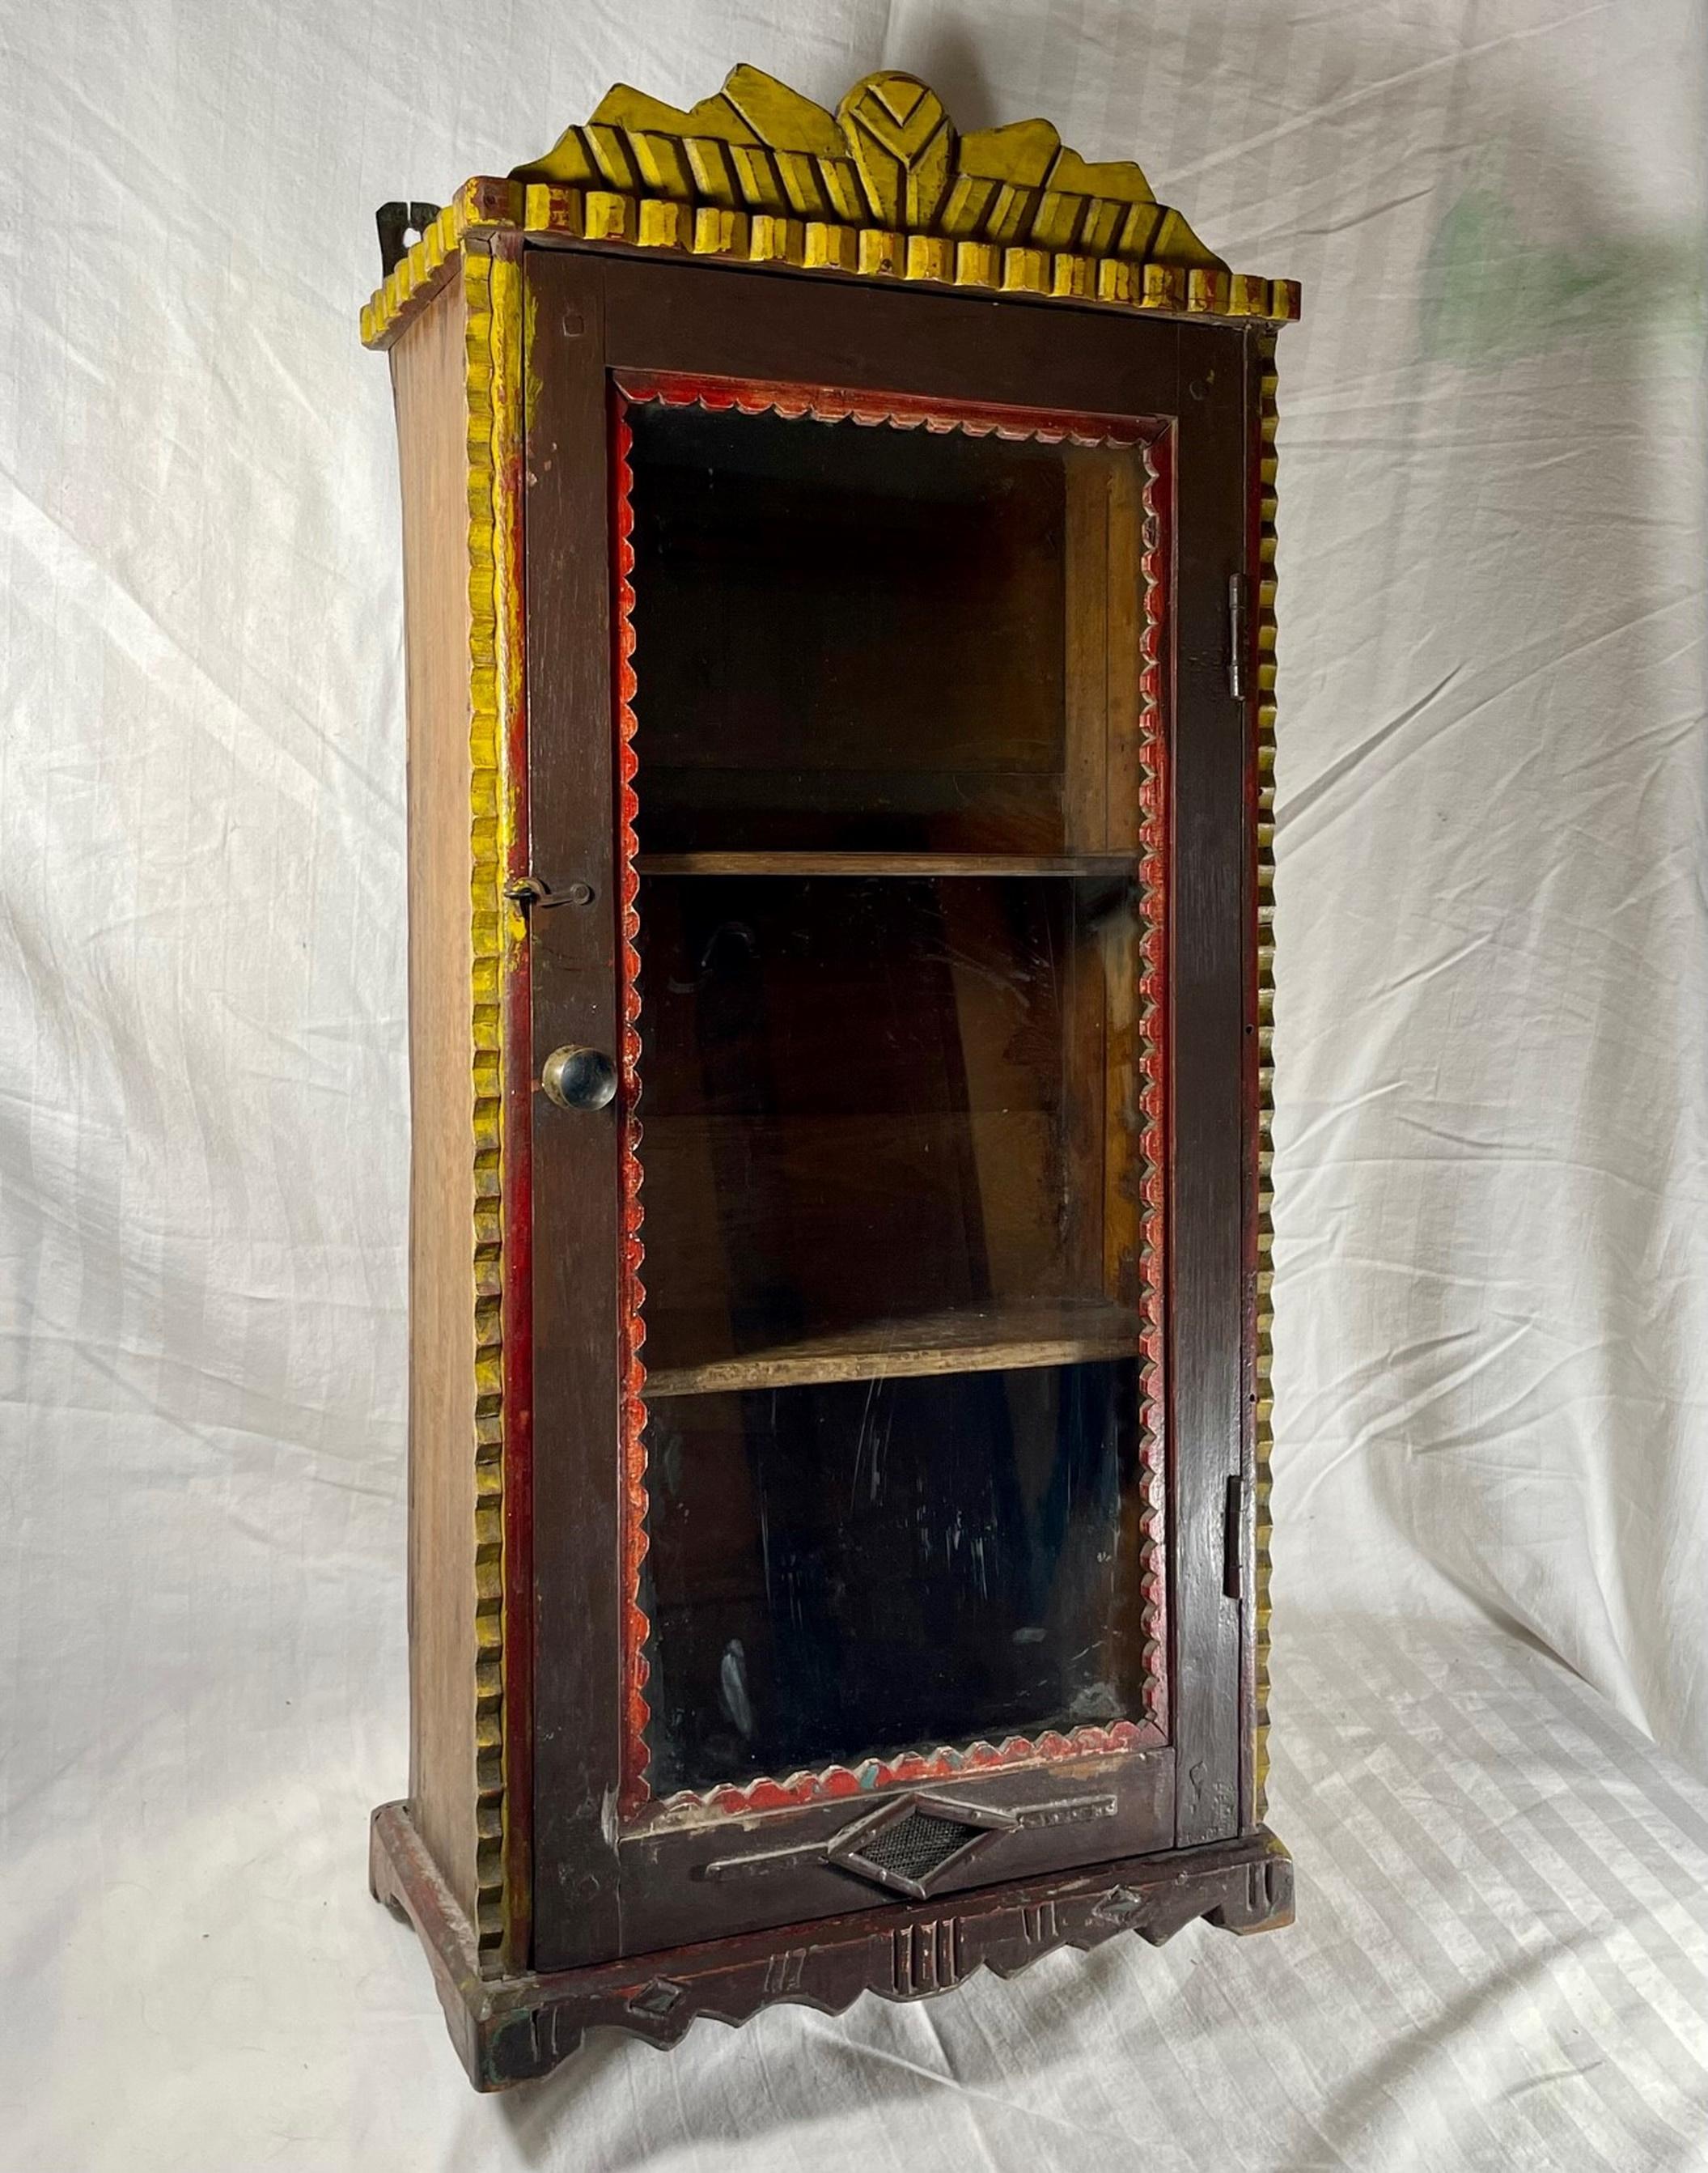 Antique tramp art wall hanging cabinet hand carved and painted ca 1880

The Tramp Art wall cabinet has great details of geometric hand cut scrap
wood and rich notch carvings. It’s rustic charm is amplified with the original
painted decorations.